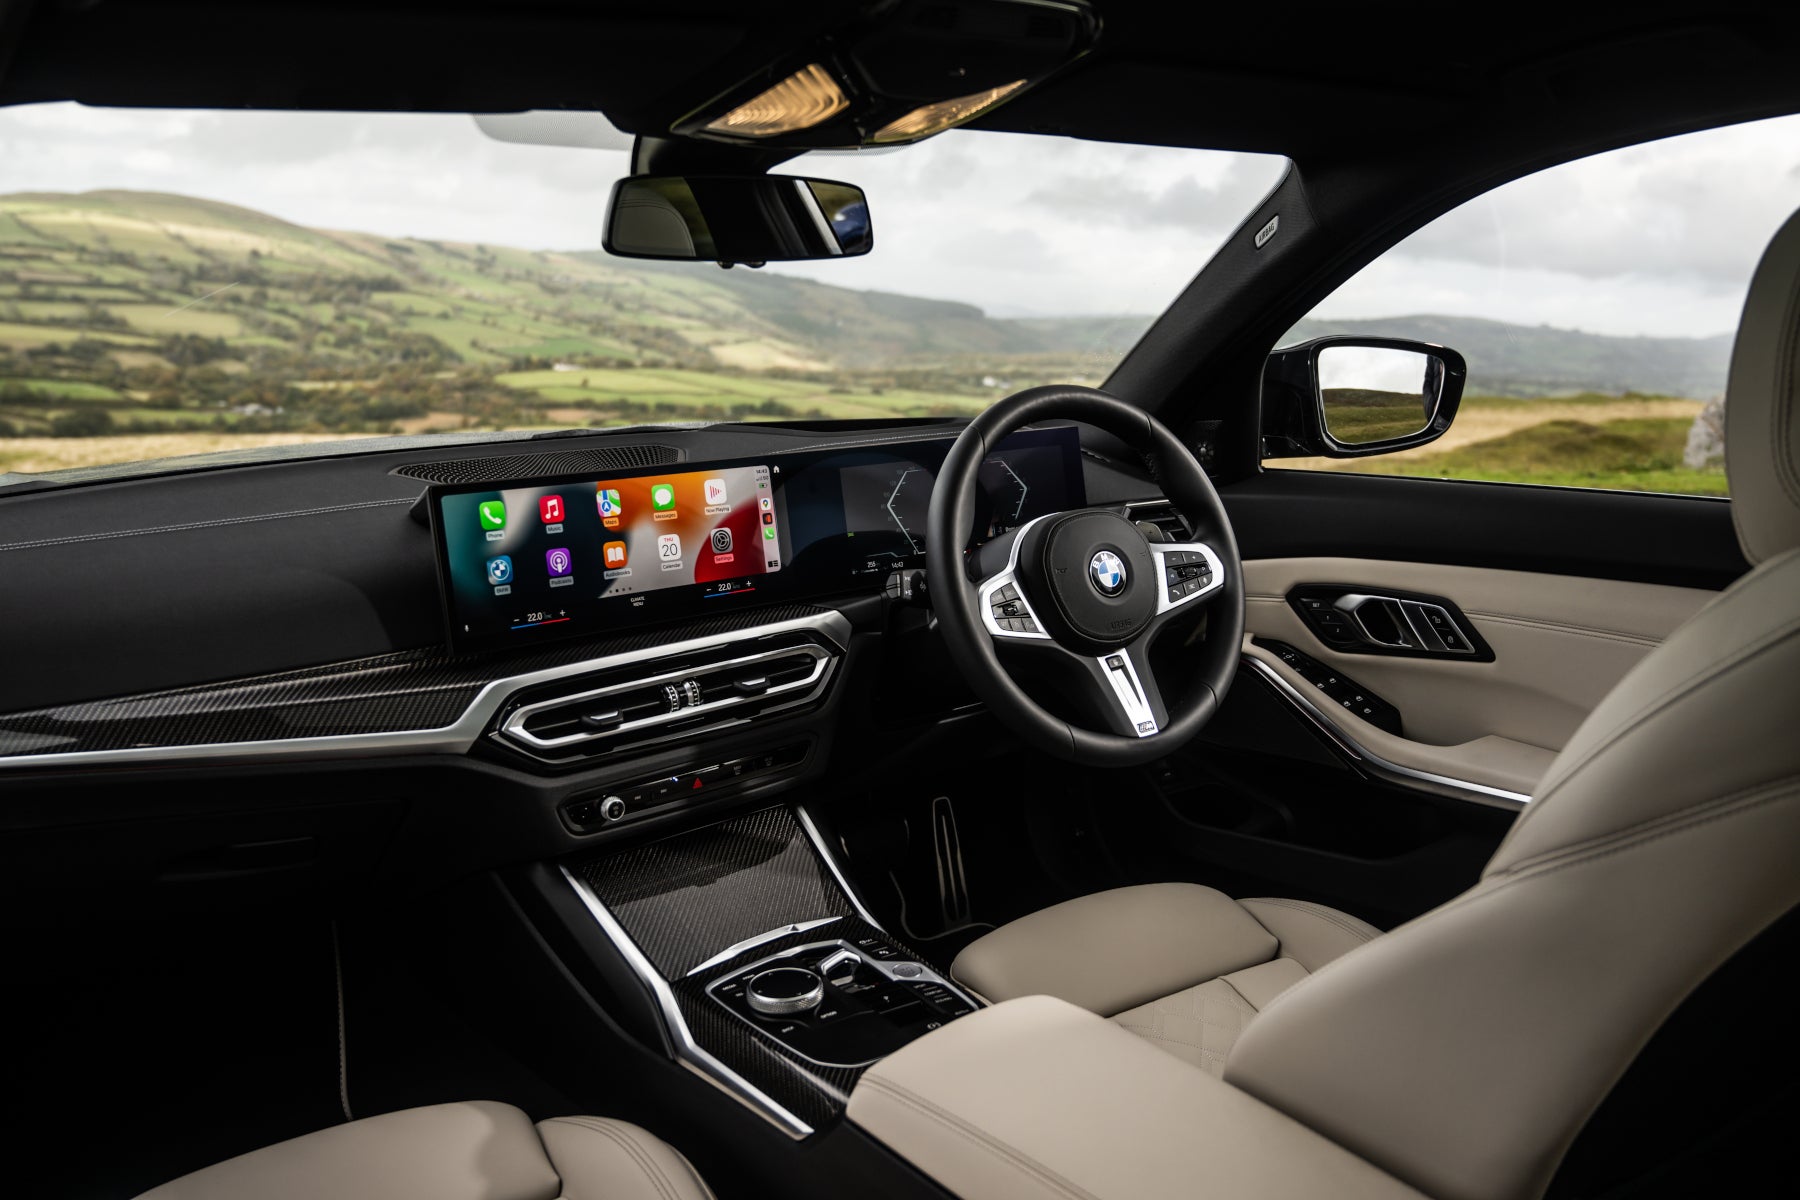 Stylish and Modern XE Interior: Comfortable Leather Seats, Safety Features & Plenty of Storage